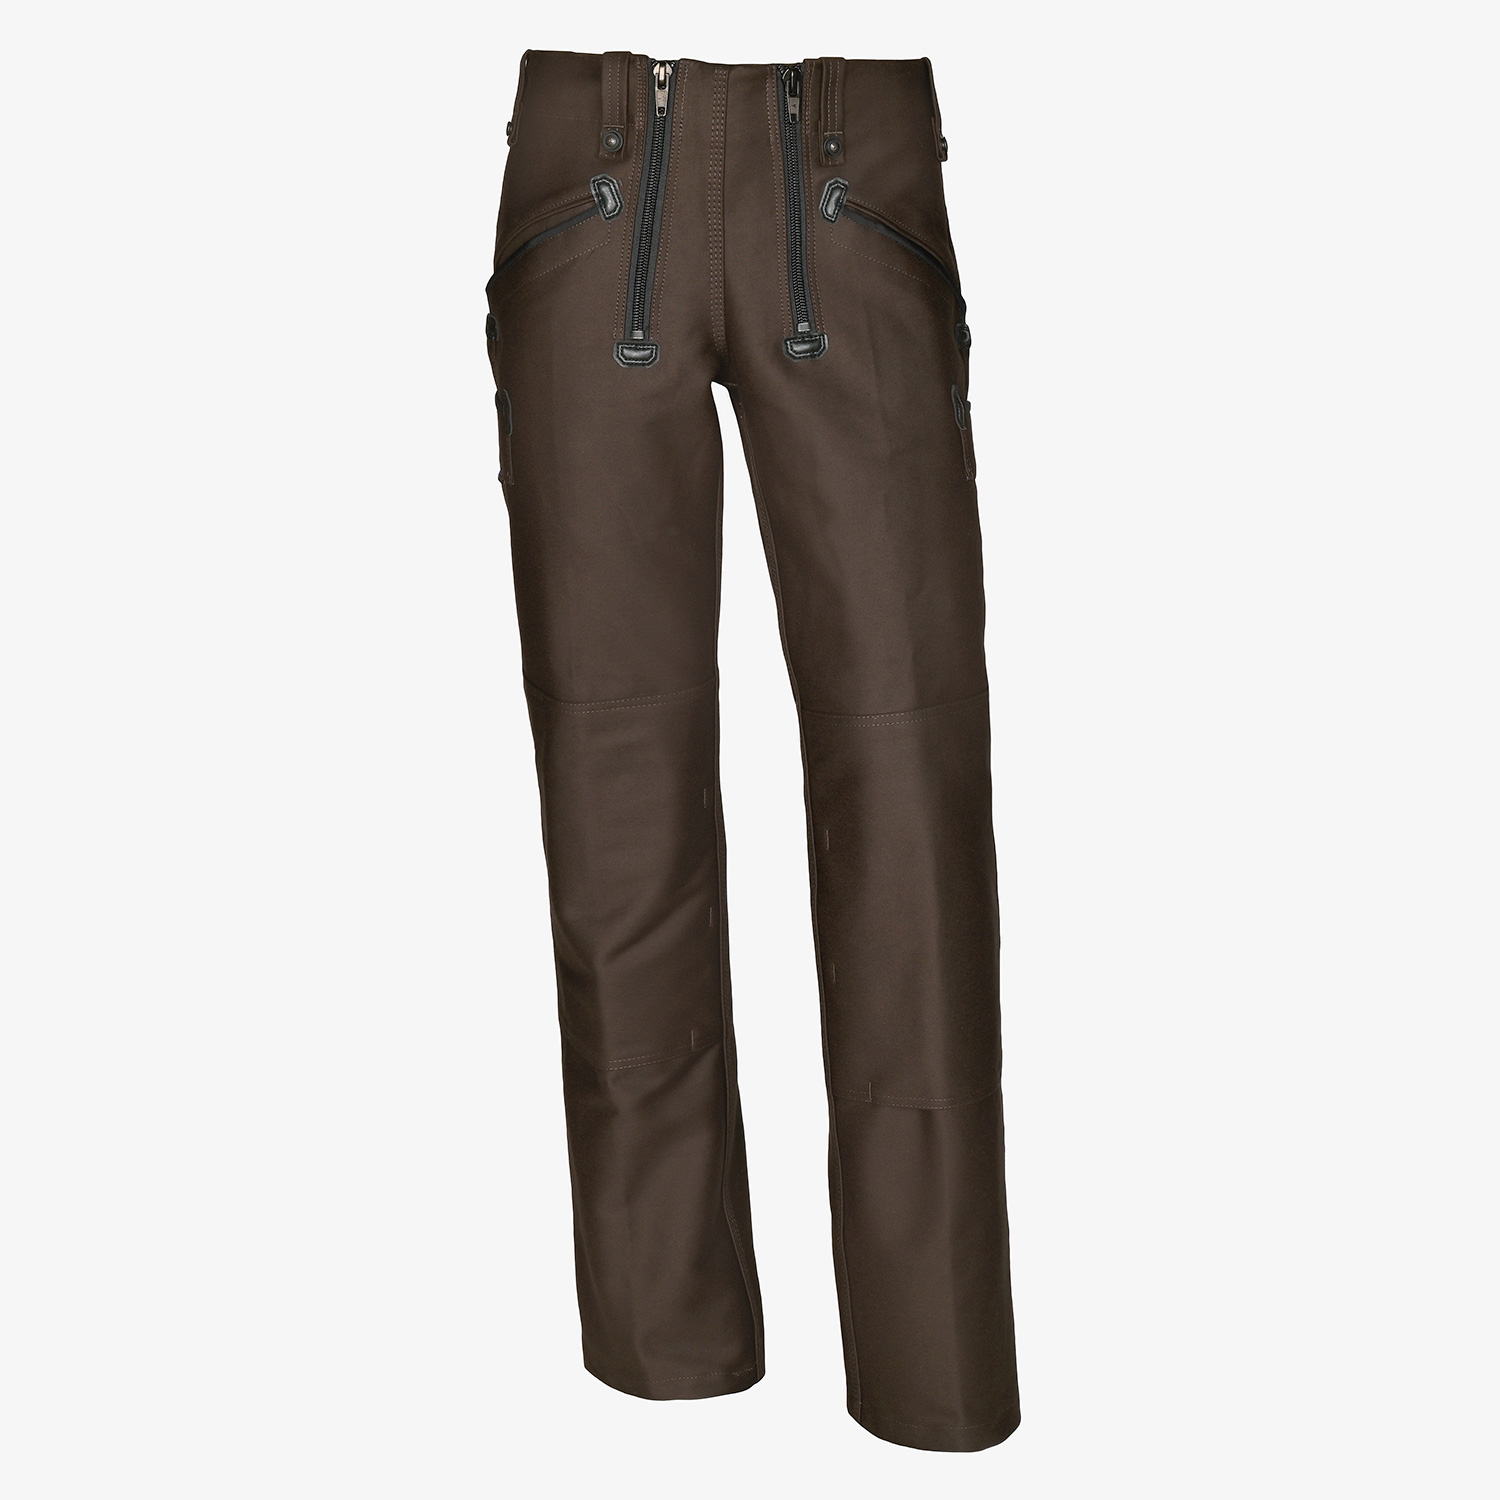 ALFRED trousers twisted double pilot without bell bottoms